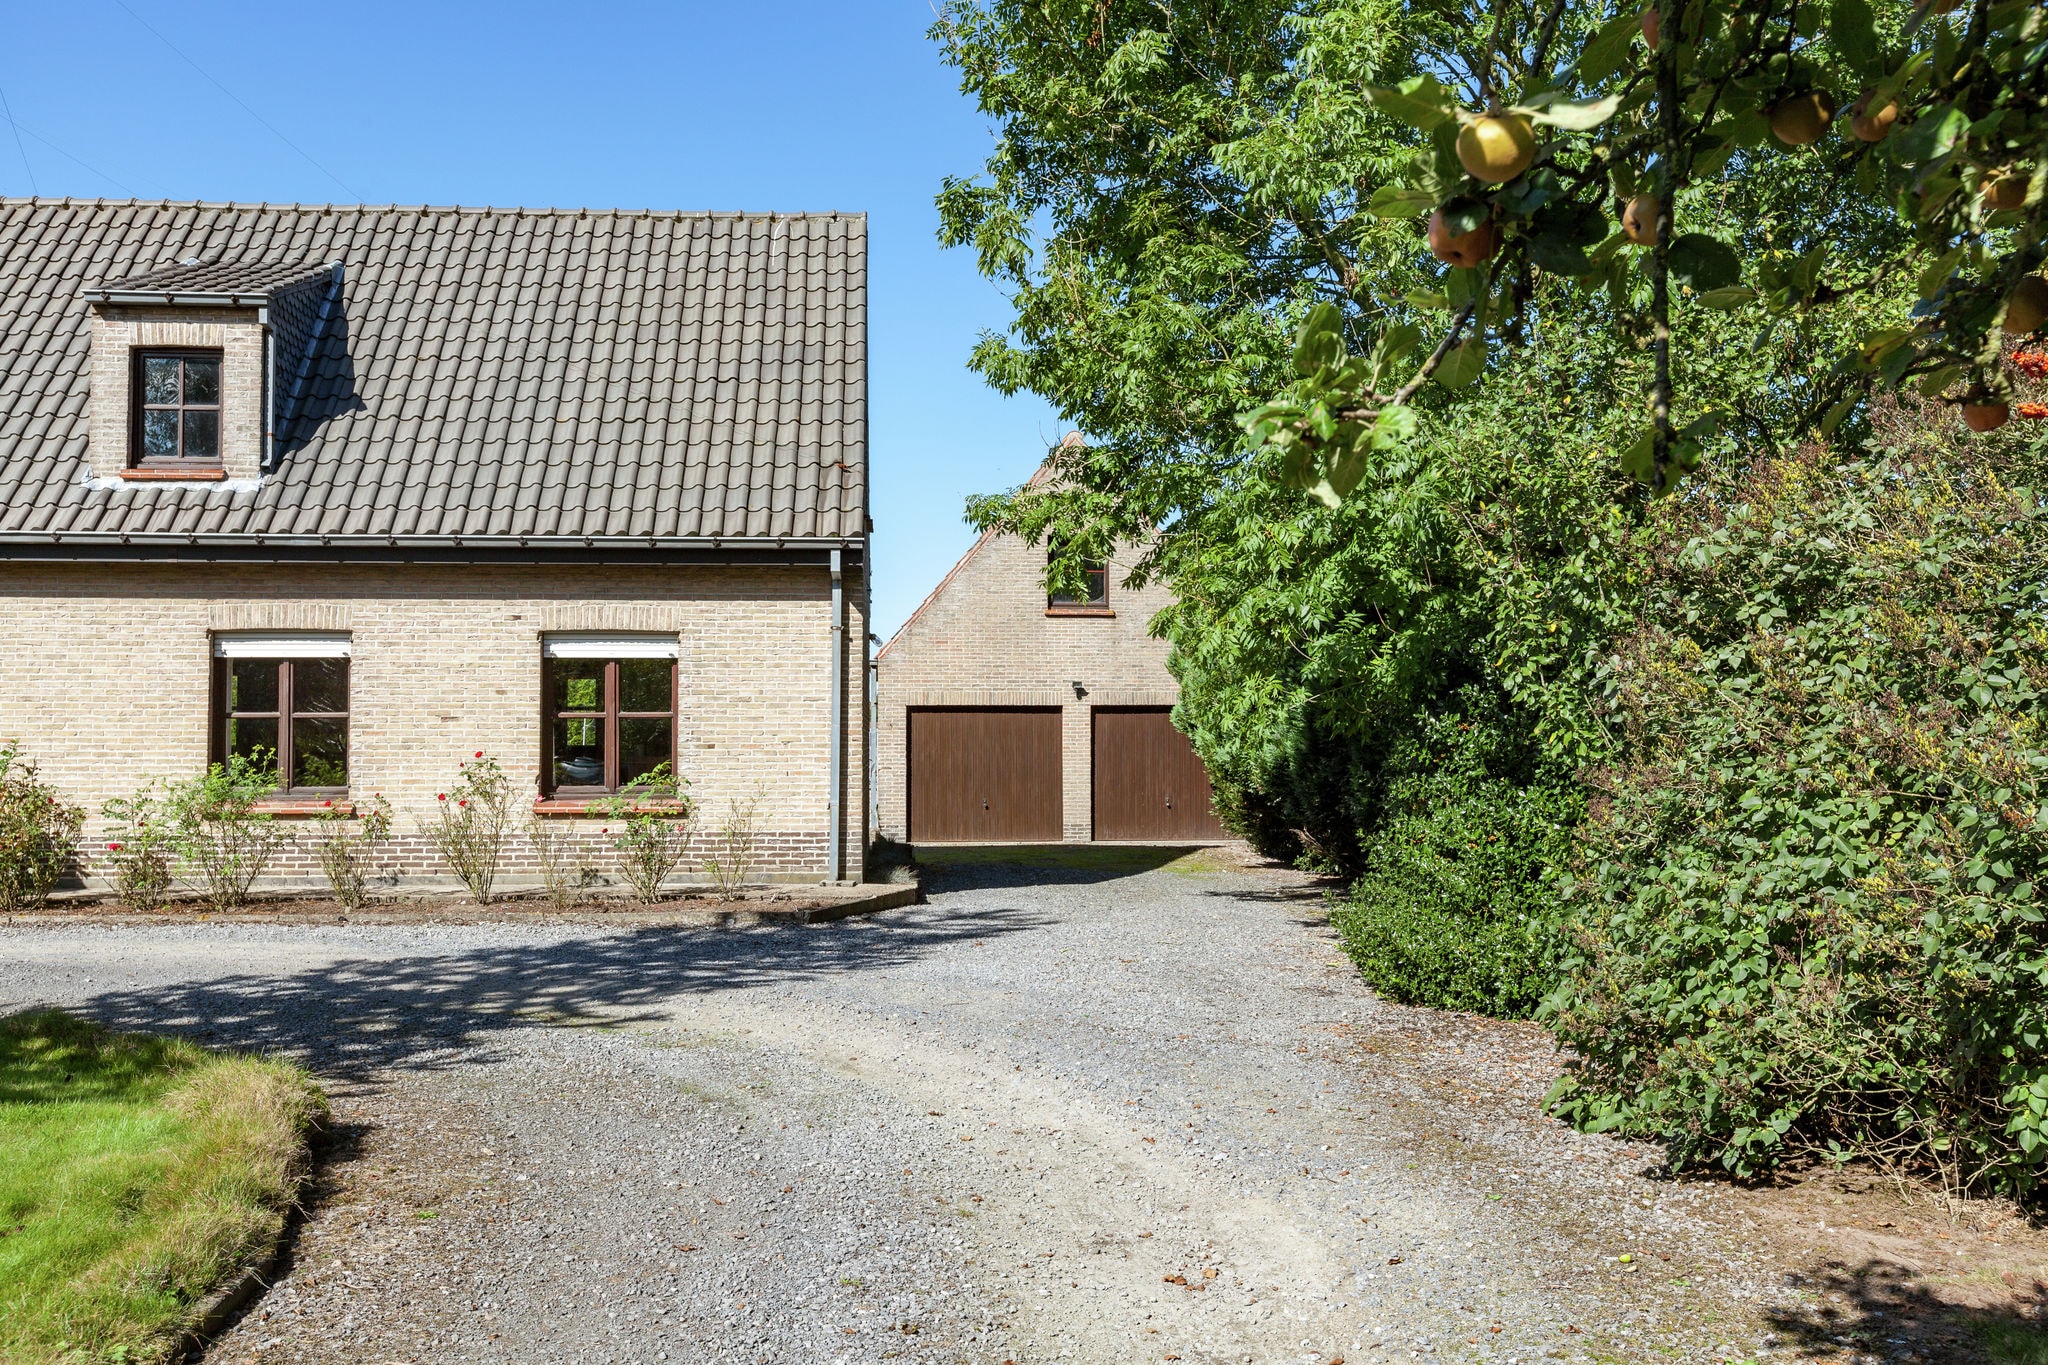 Villa with jacuzzi and large enclosed garden near the forrest around Bruges.